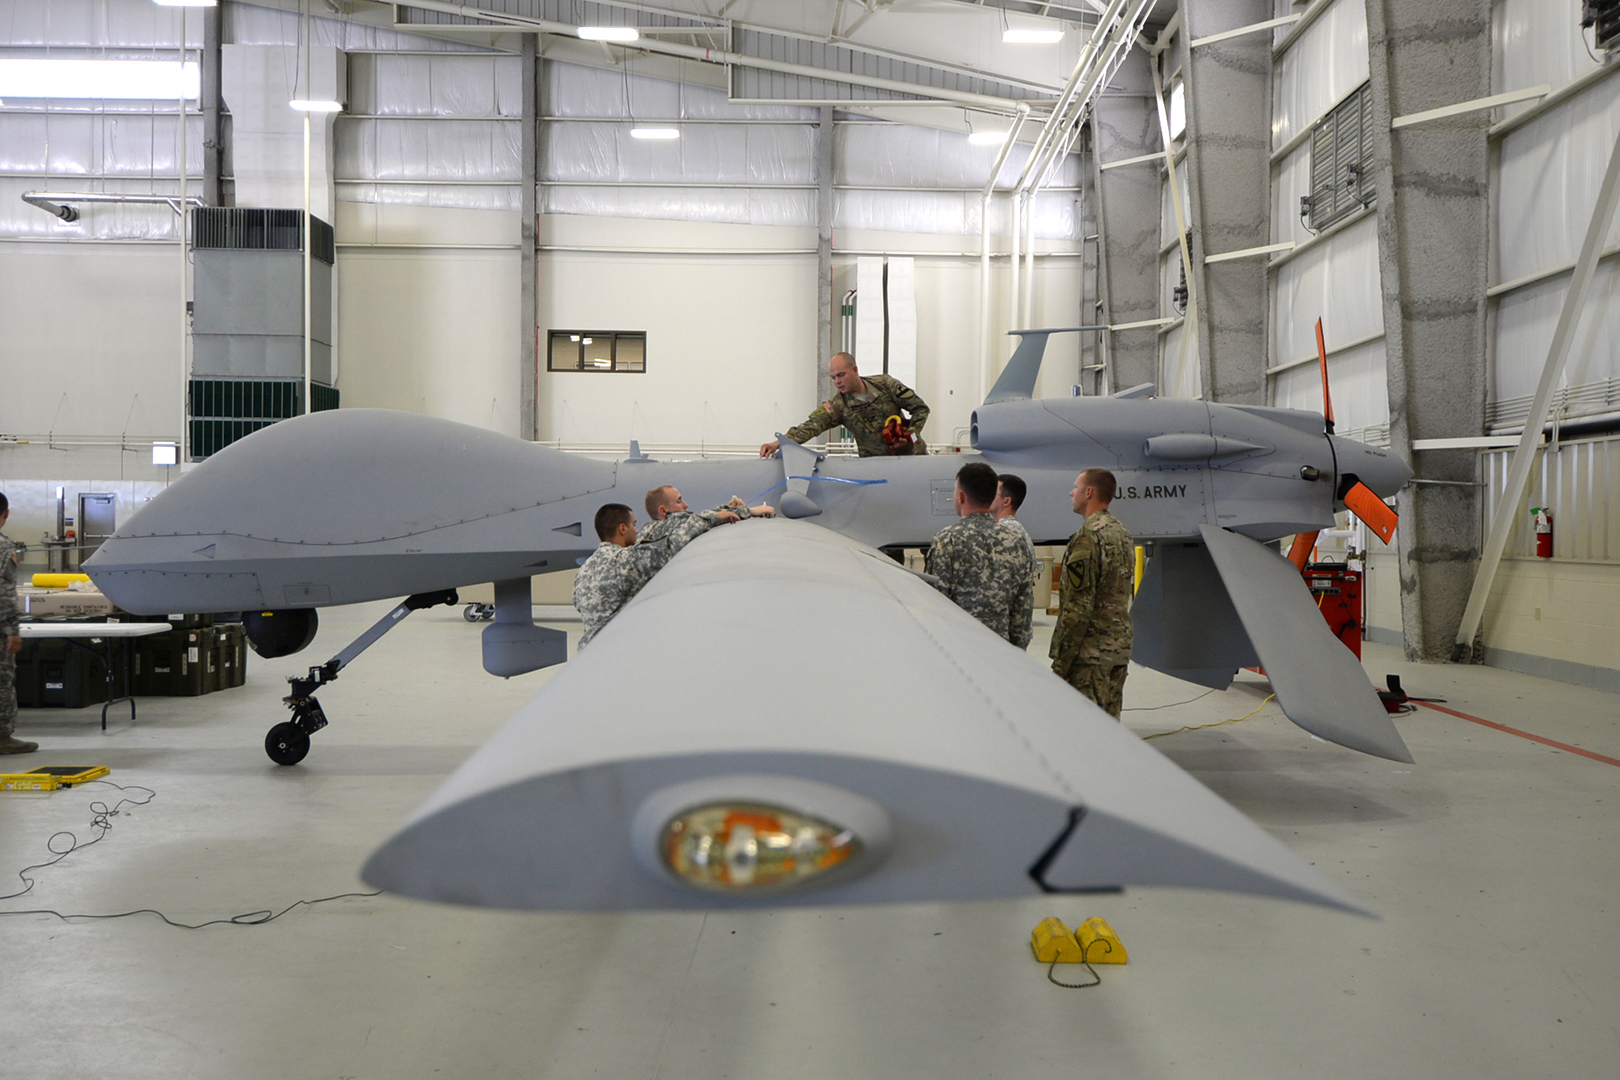 Sgt. Will Scott (top) and other unmanned aircraft systems repairers perform a preflight weight and balance check on a Gray Eagle UAV. (Photo by Meghan Portillo/NCO Journal)